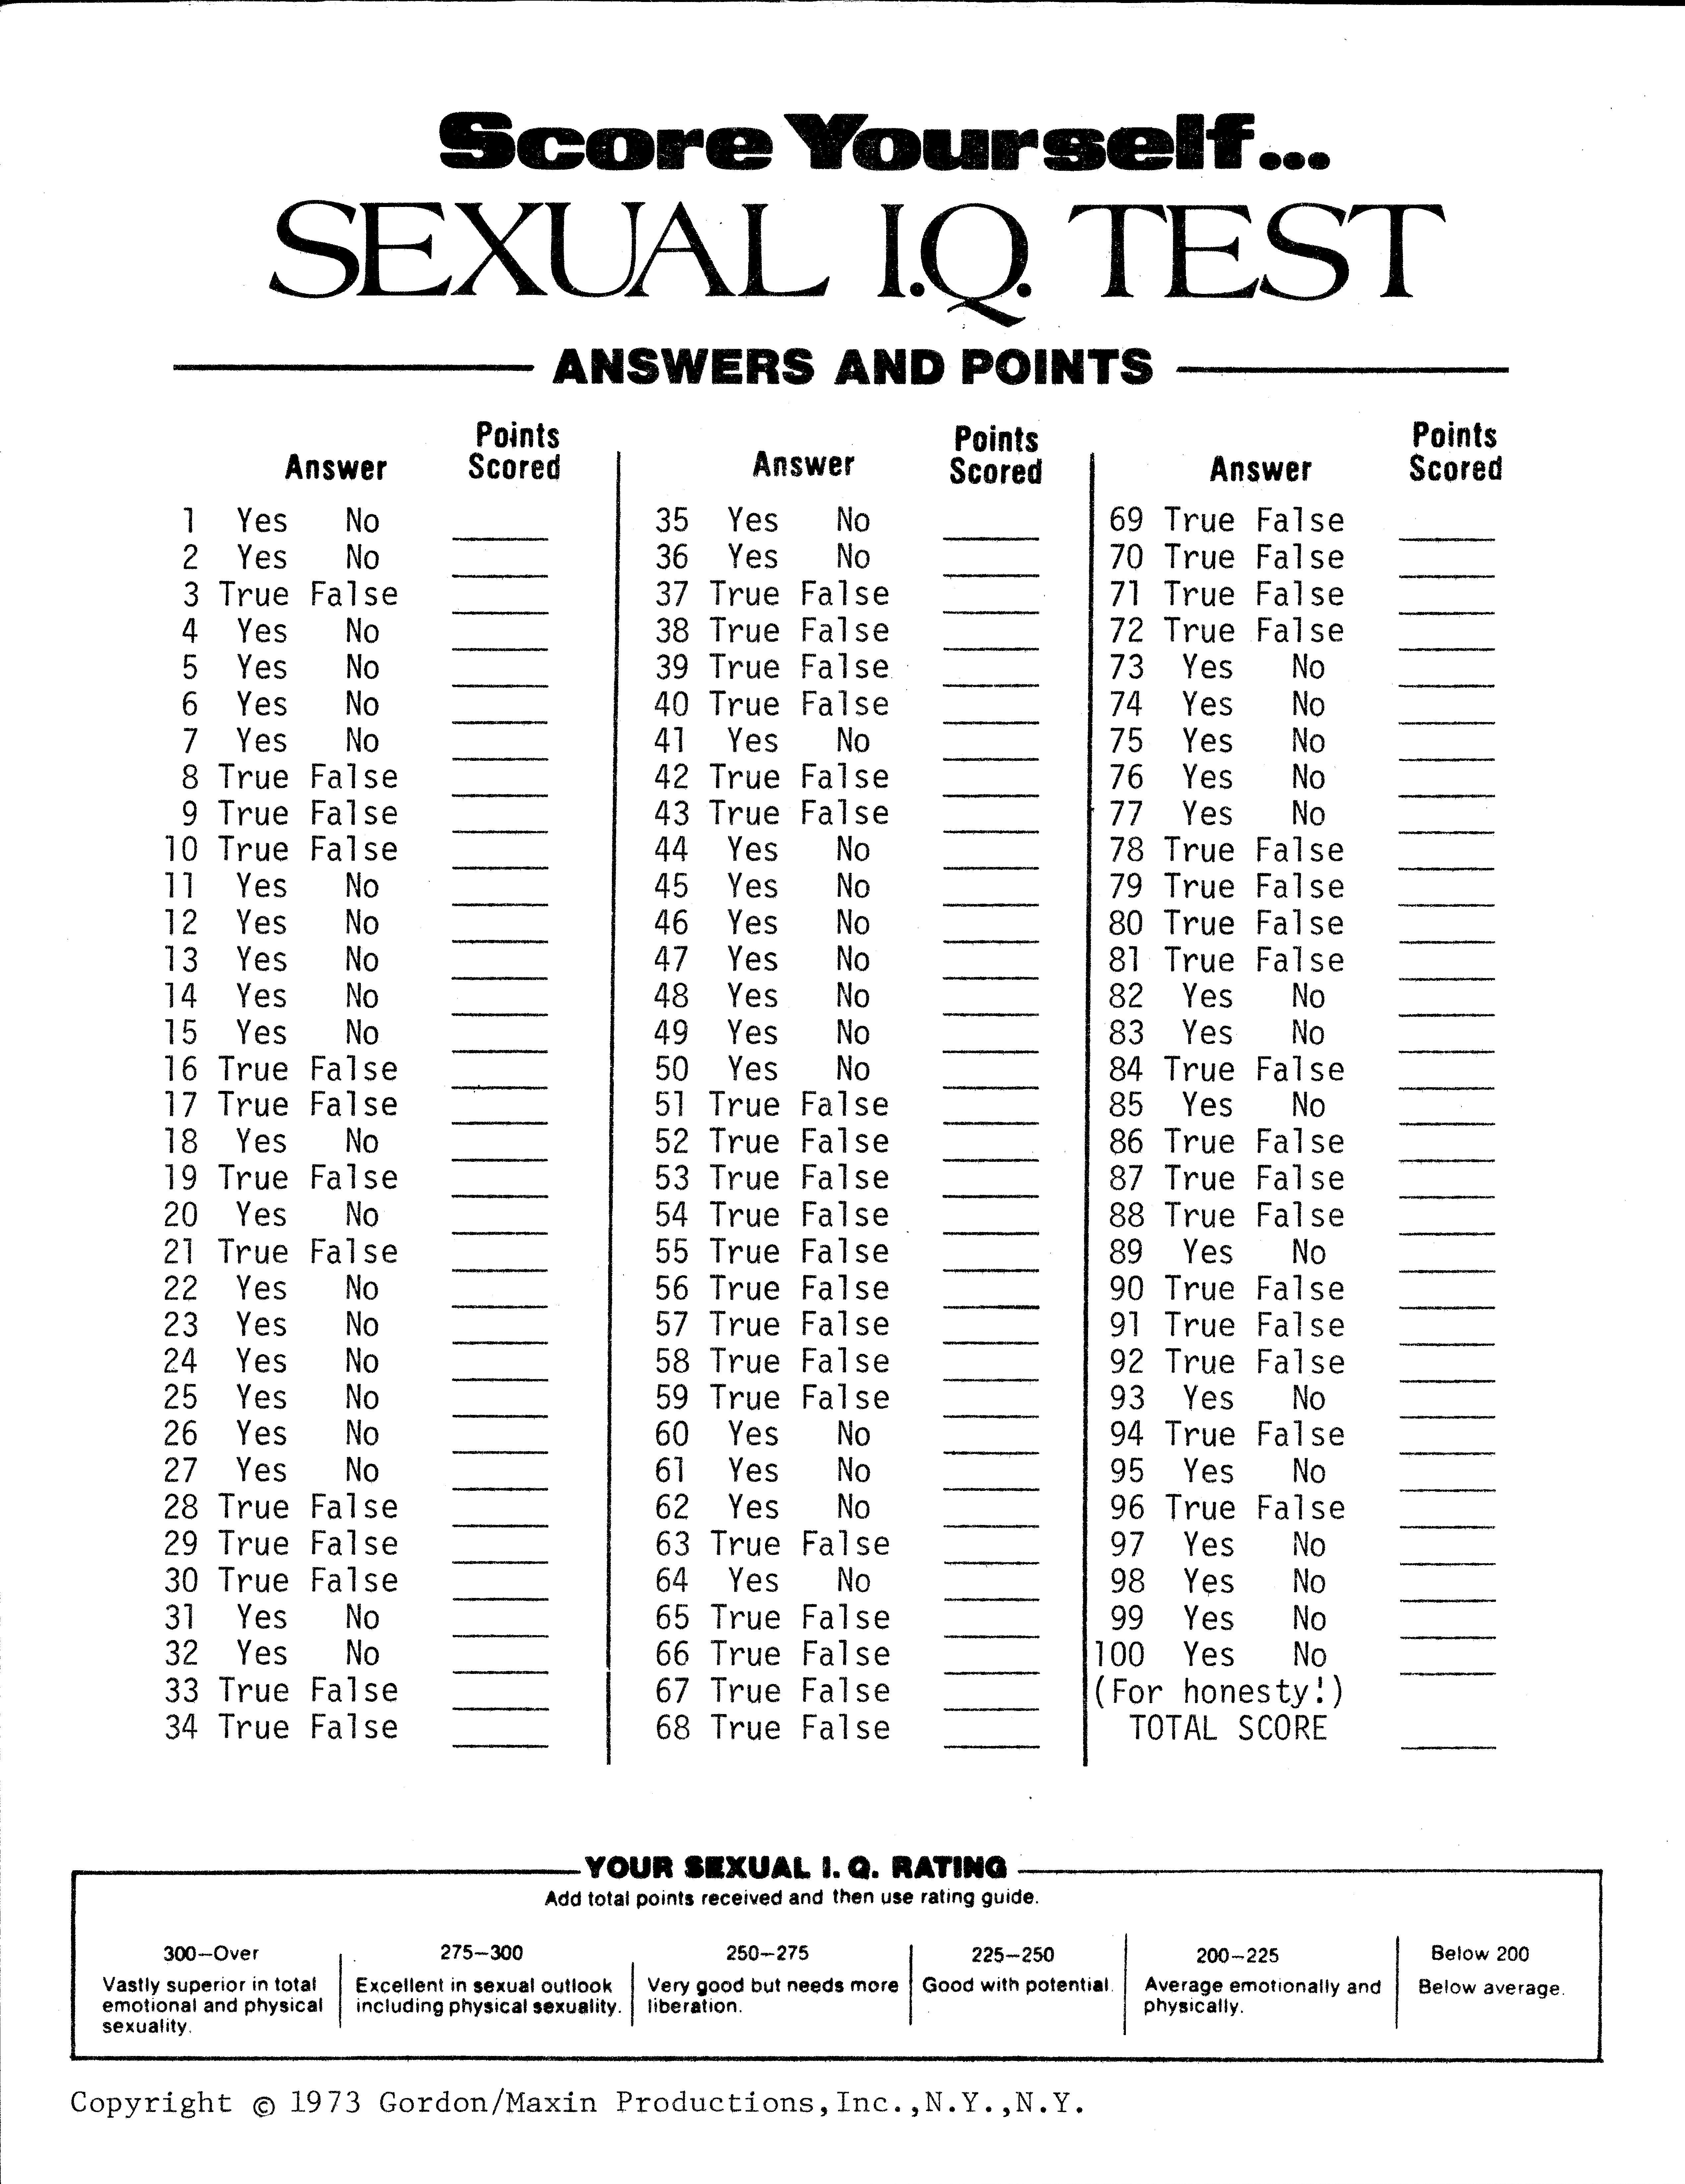 My Weirdest Record Score Yourself…sexual I Q Test Mostly Retro